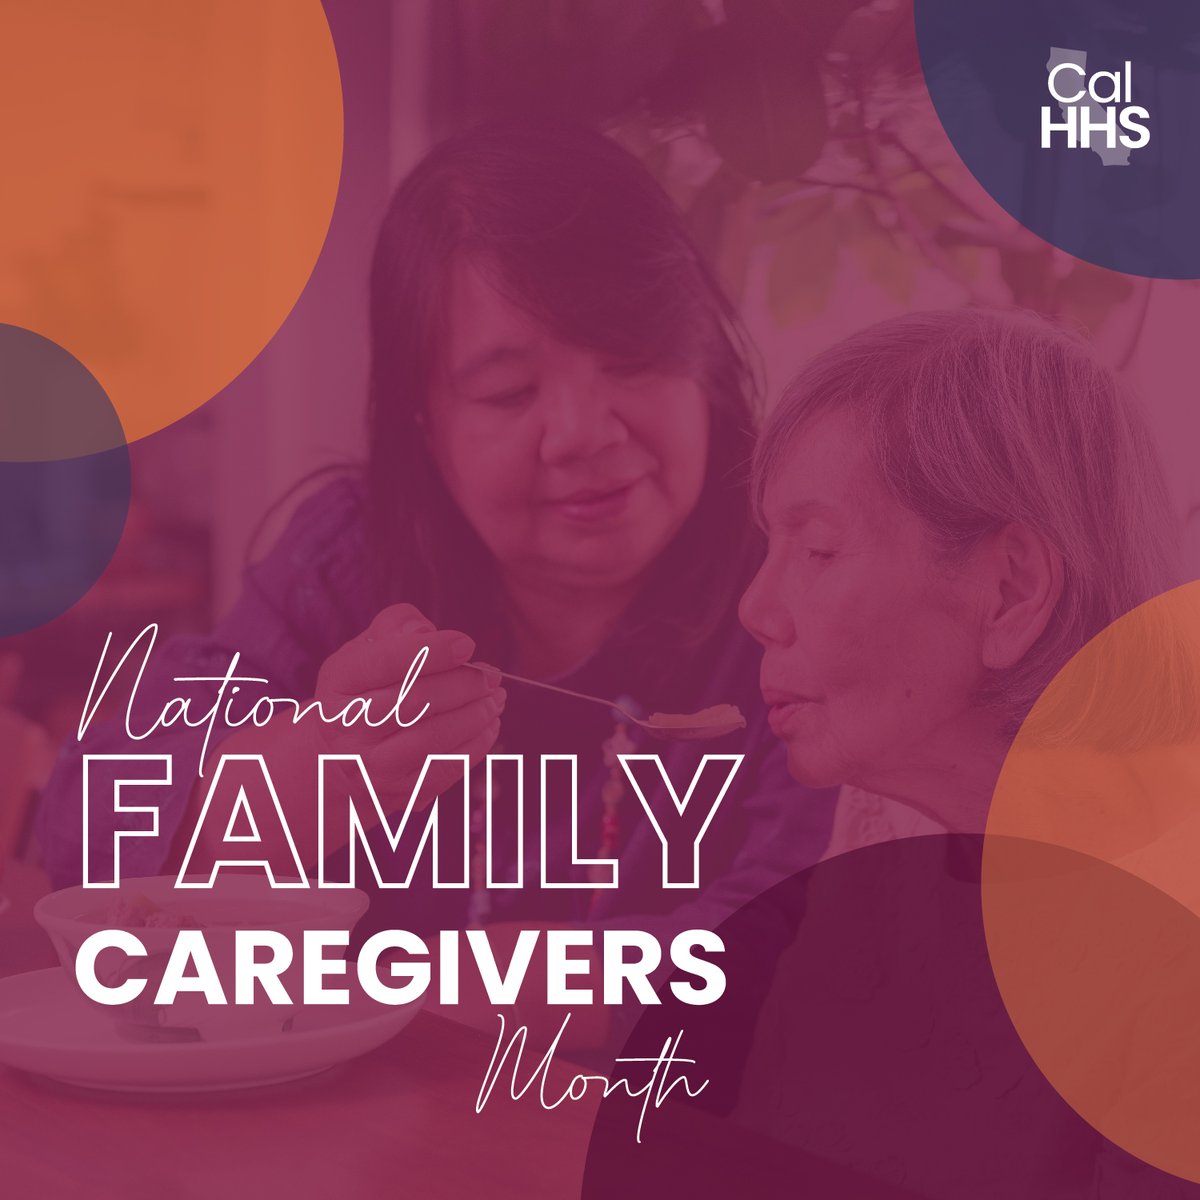 Caregiving is one of the most selfless yet challenging jobs anyone can have.

This November during #NFCMonth, we honor all Californians who provide invaluable care & support to their loved ones.